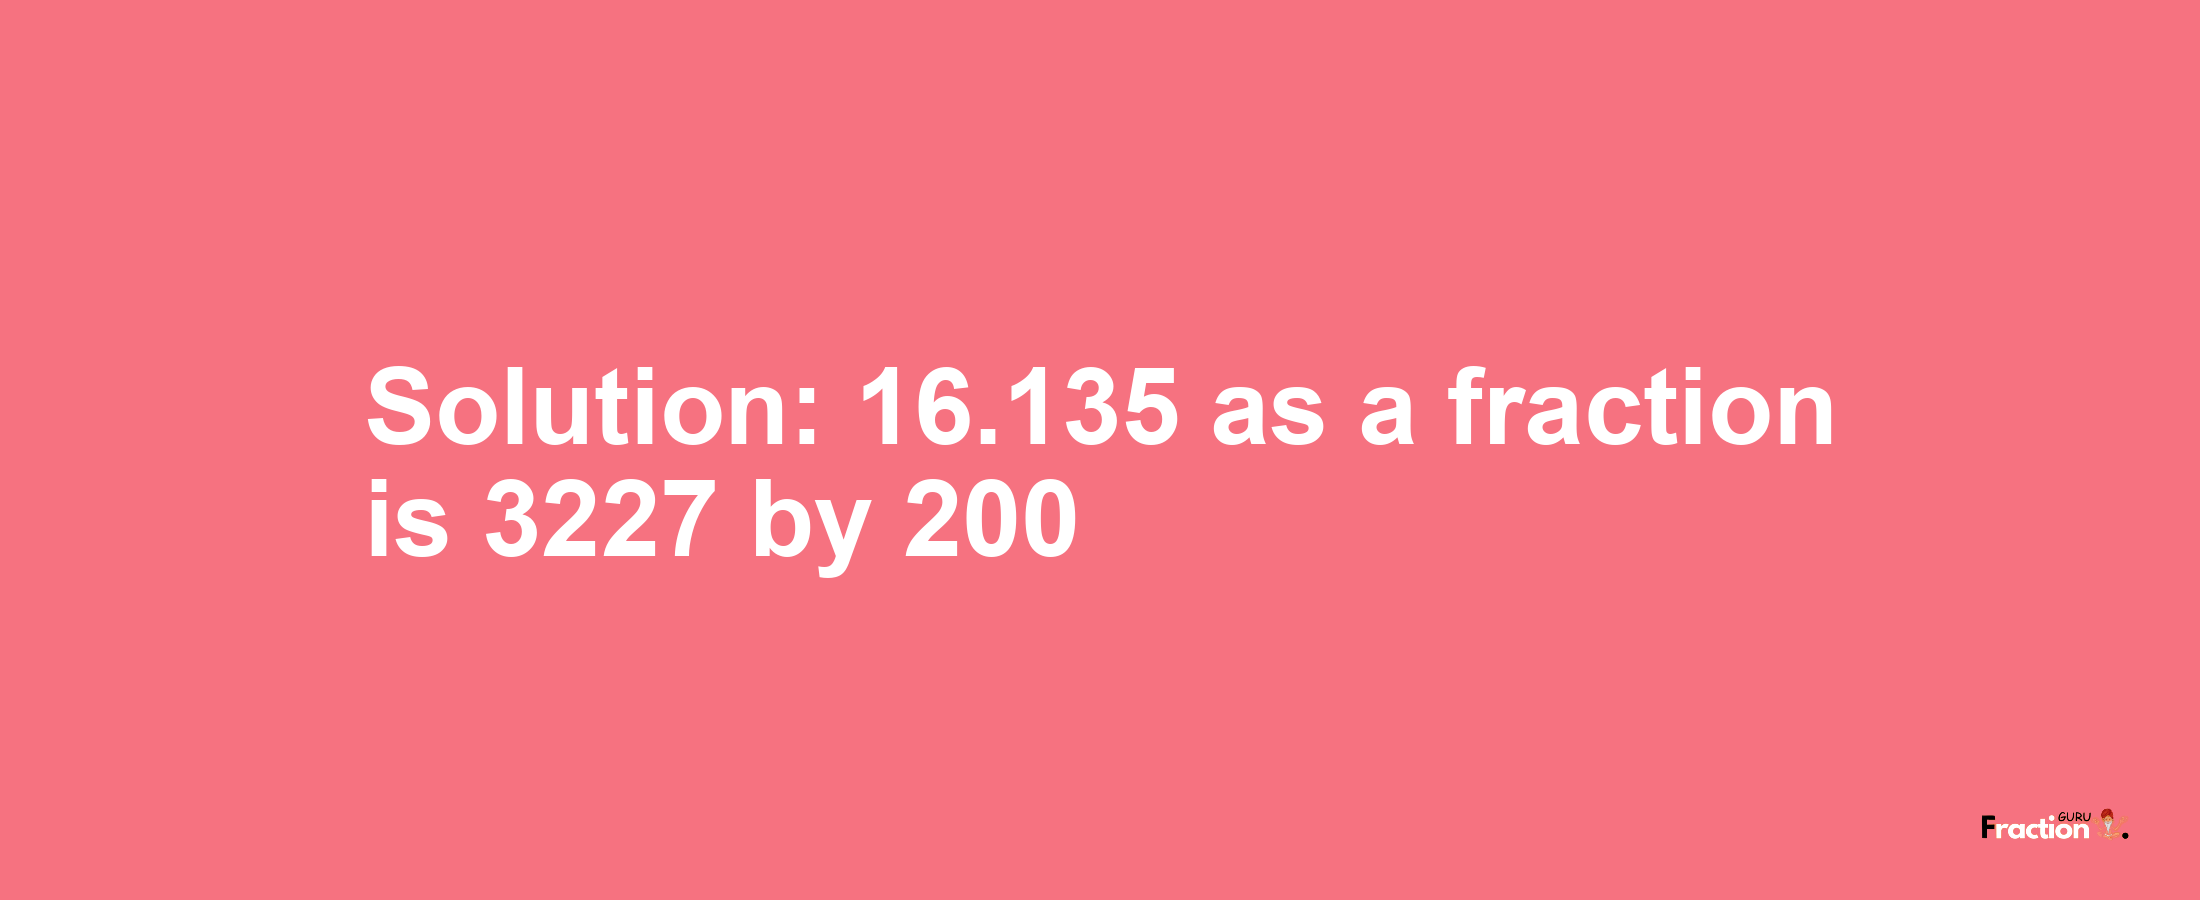 Solution:16.135 as a fraction is 3227/200